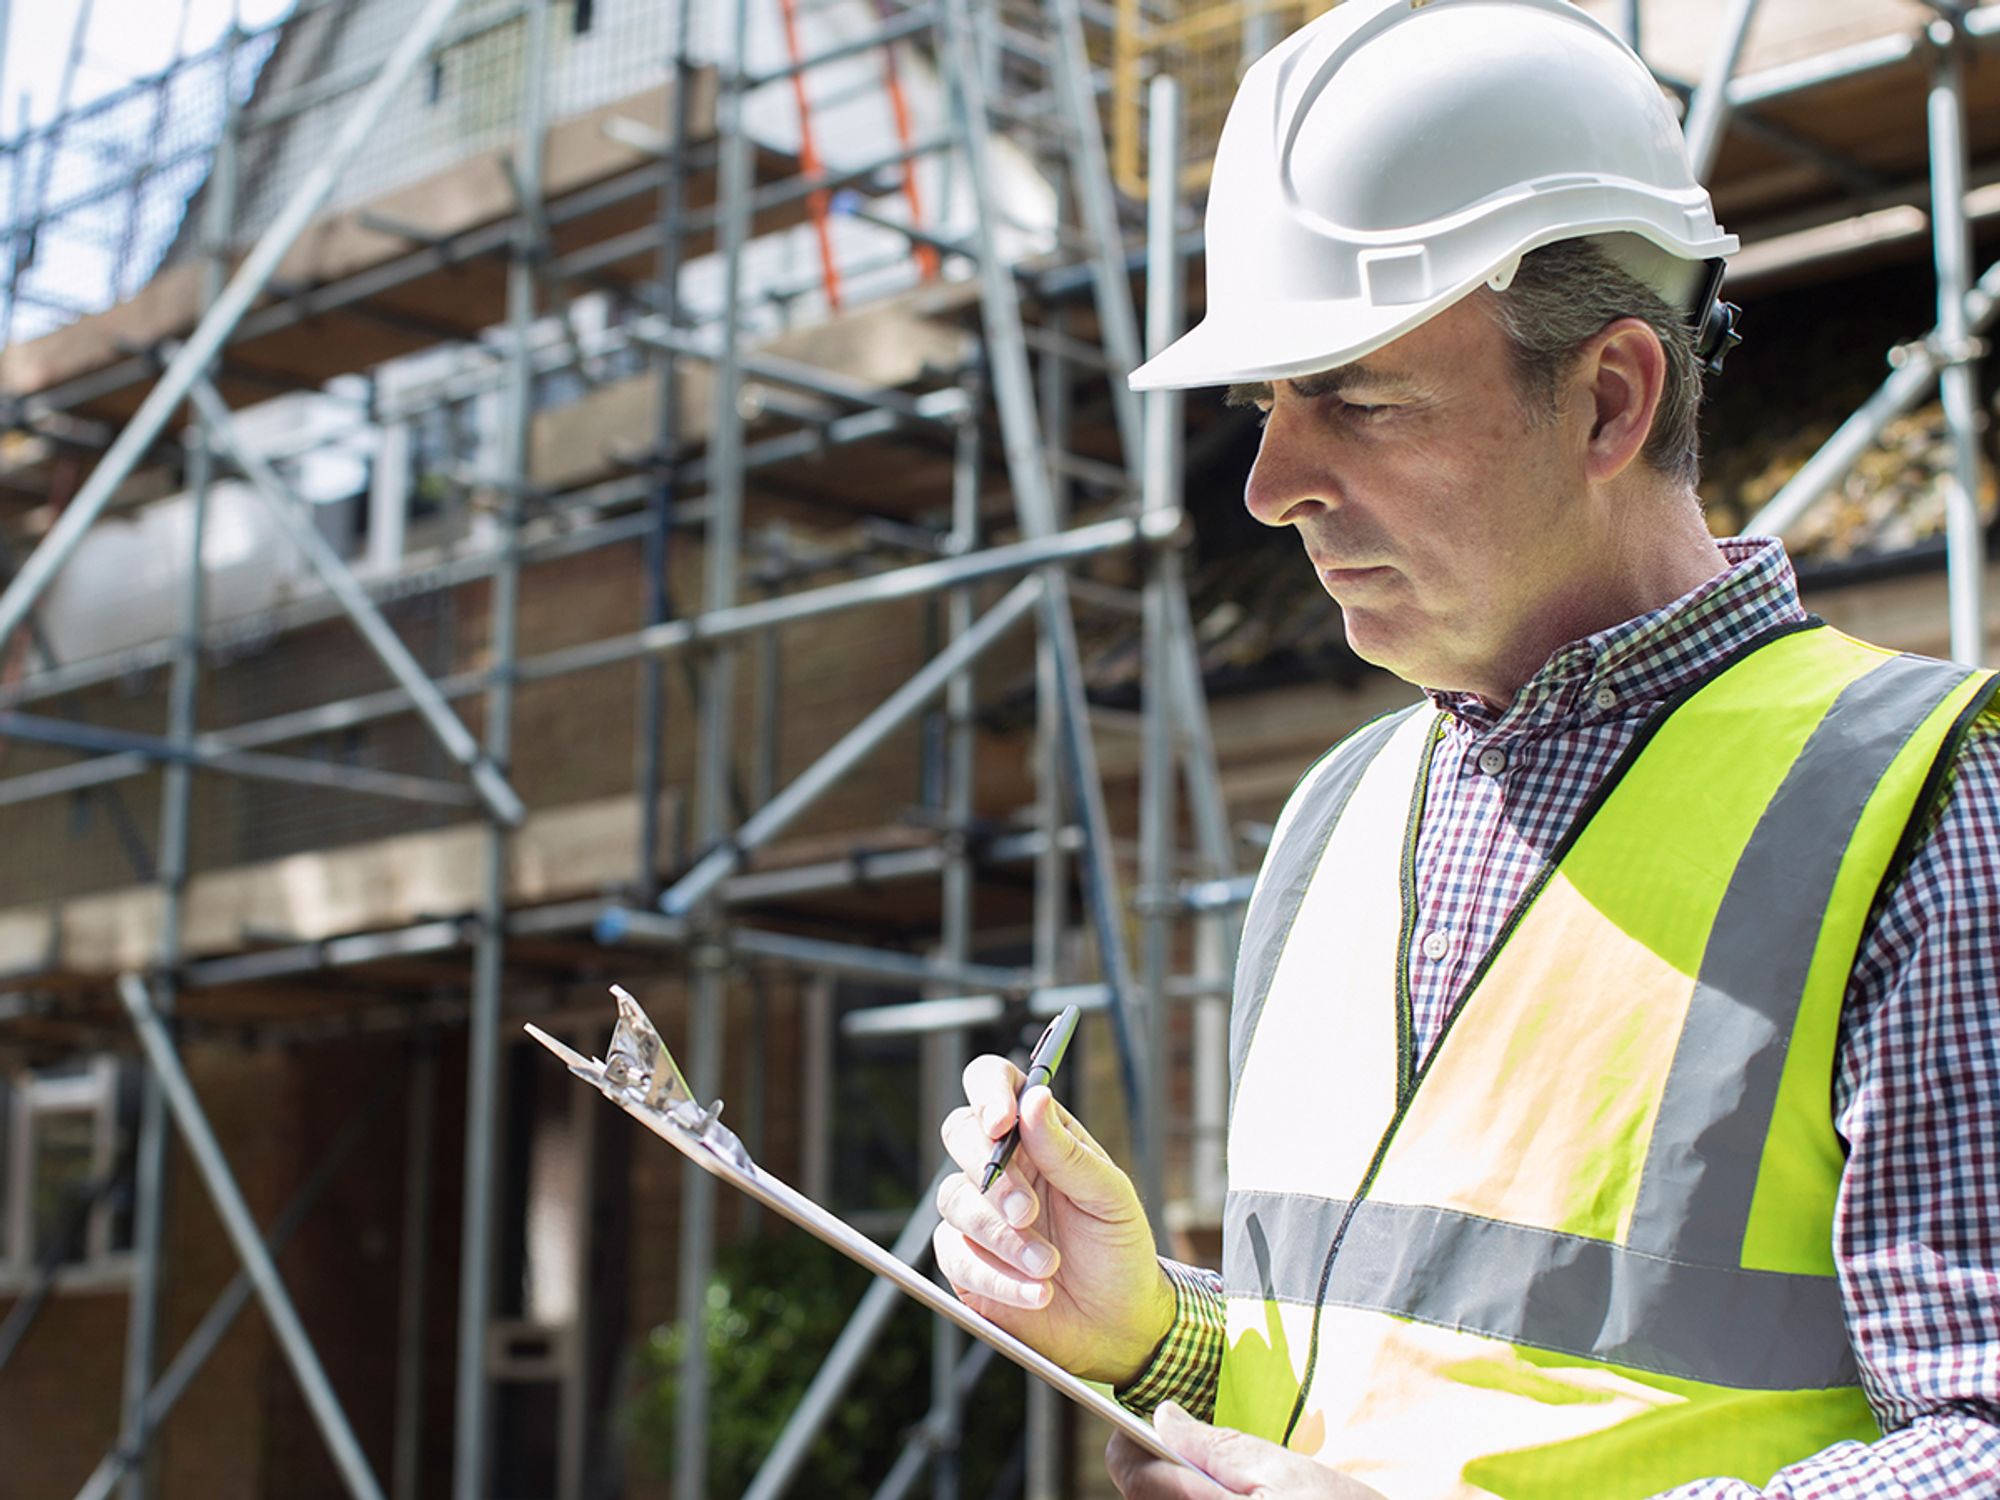 Know the OSHA regulations that govern fall protection